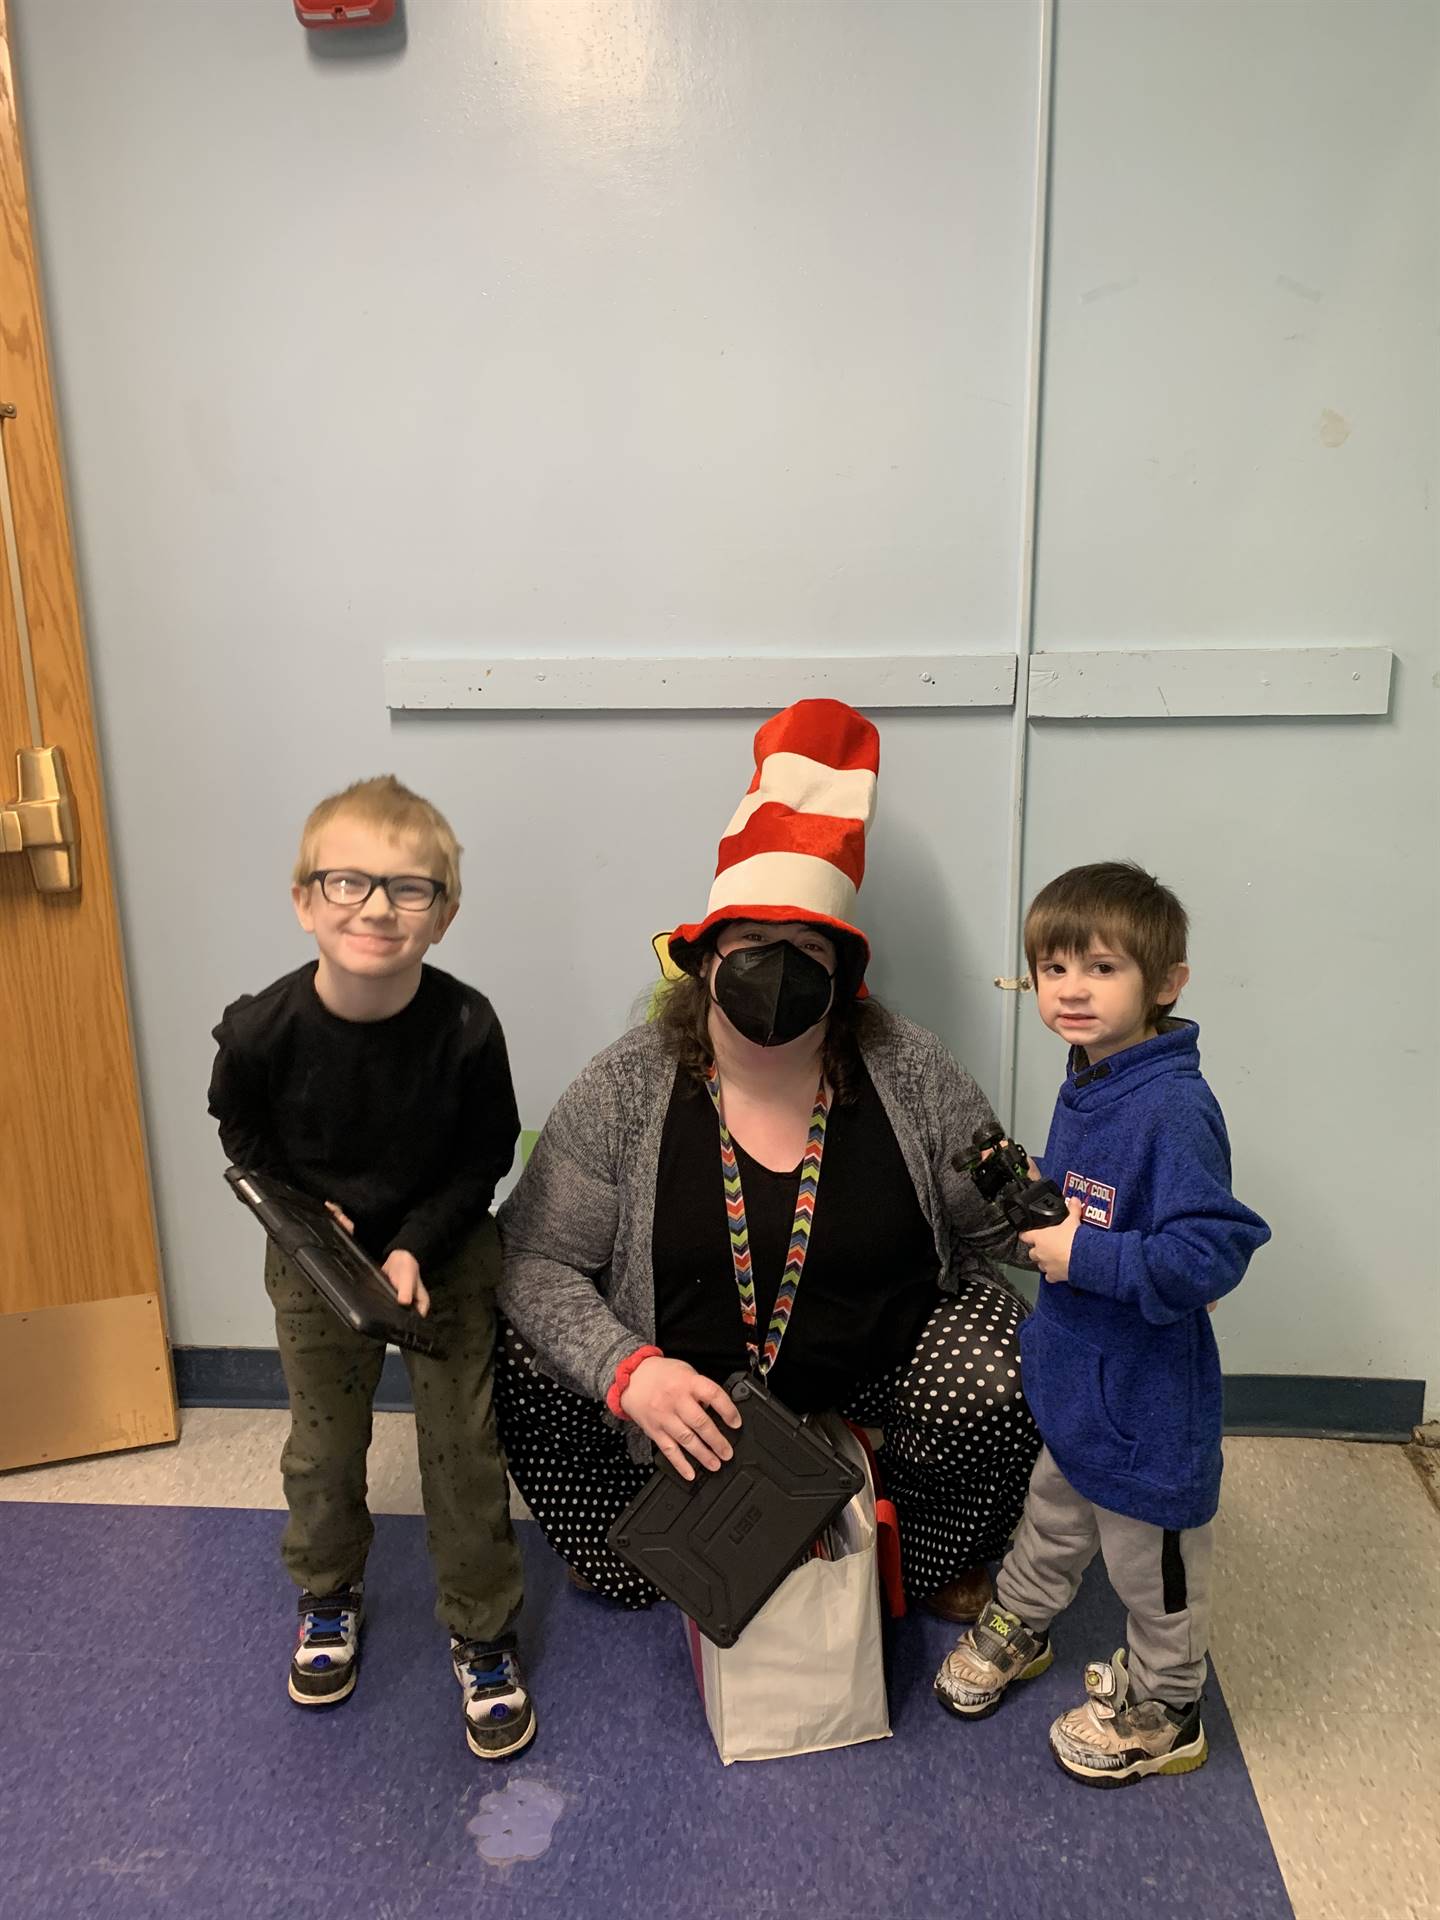 teacher with dr. Suess hat between 2 students